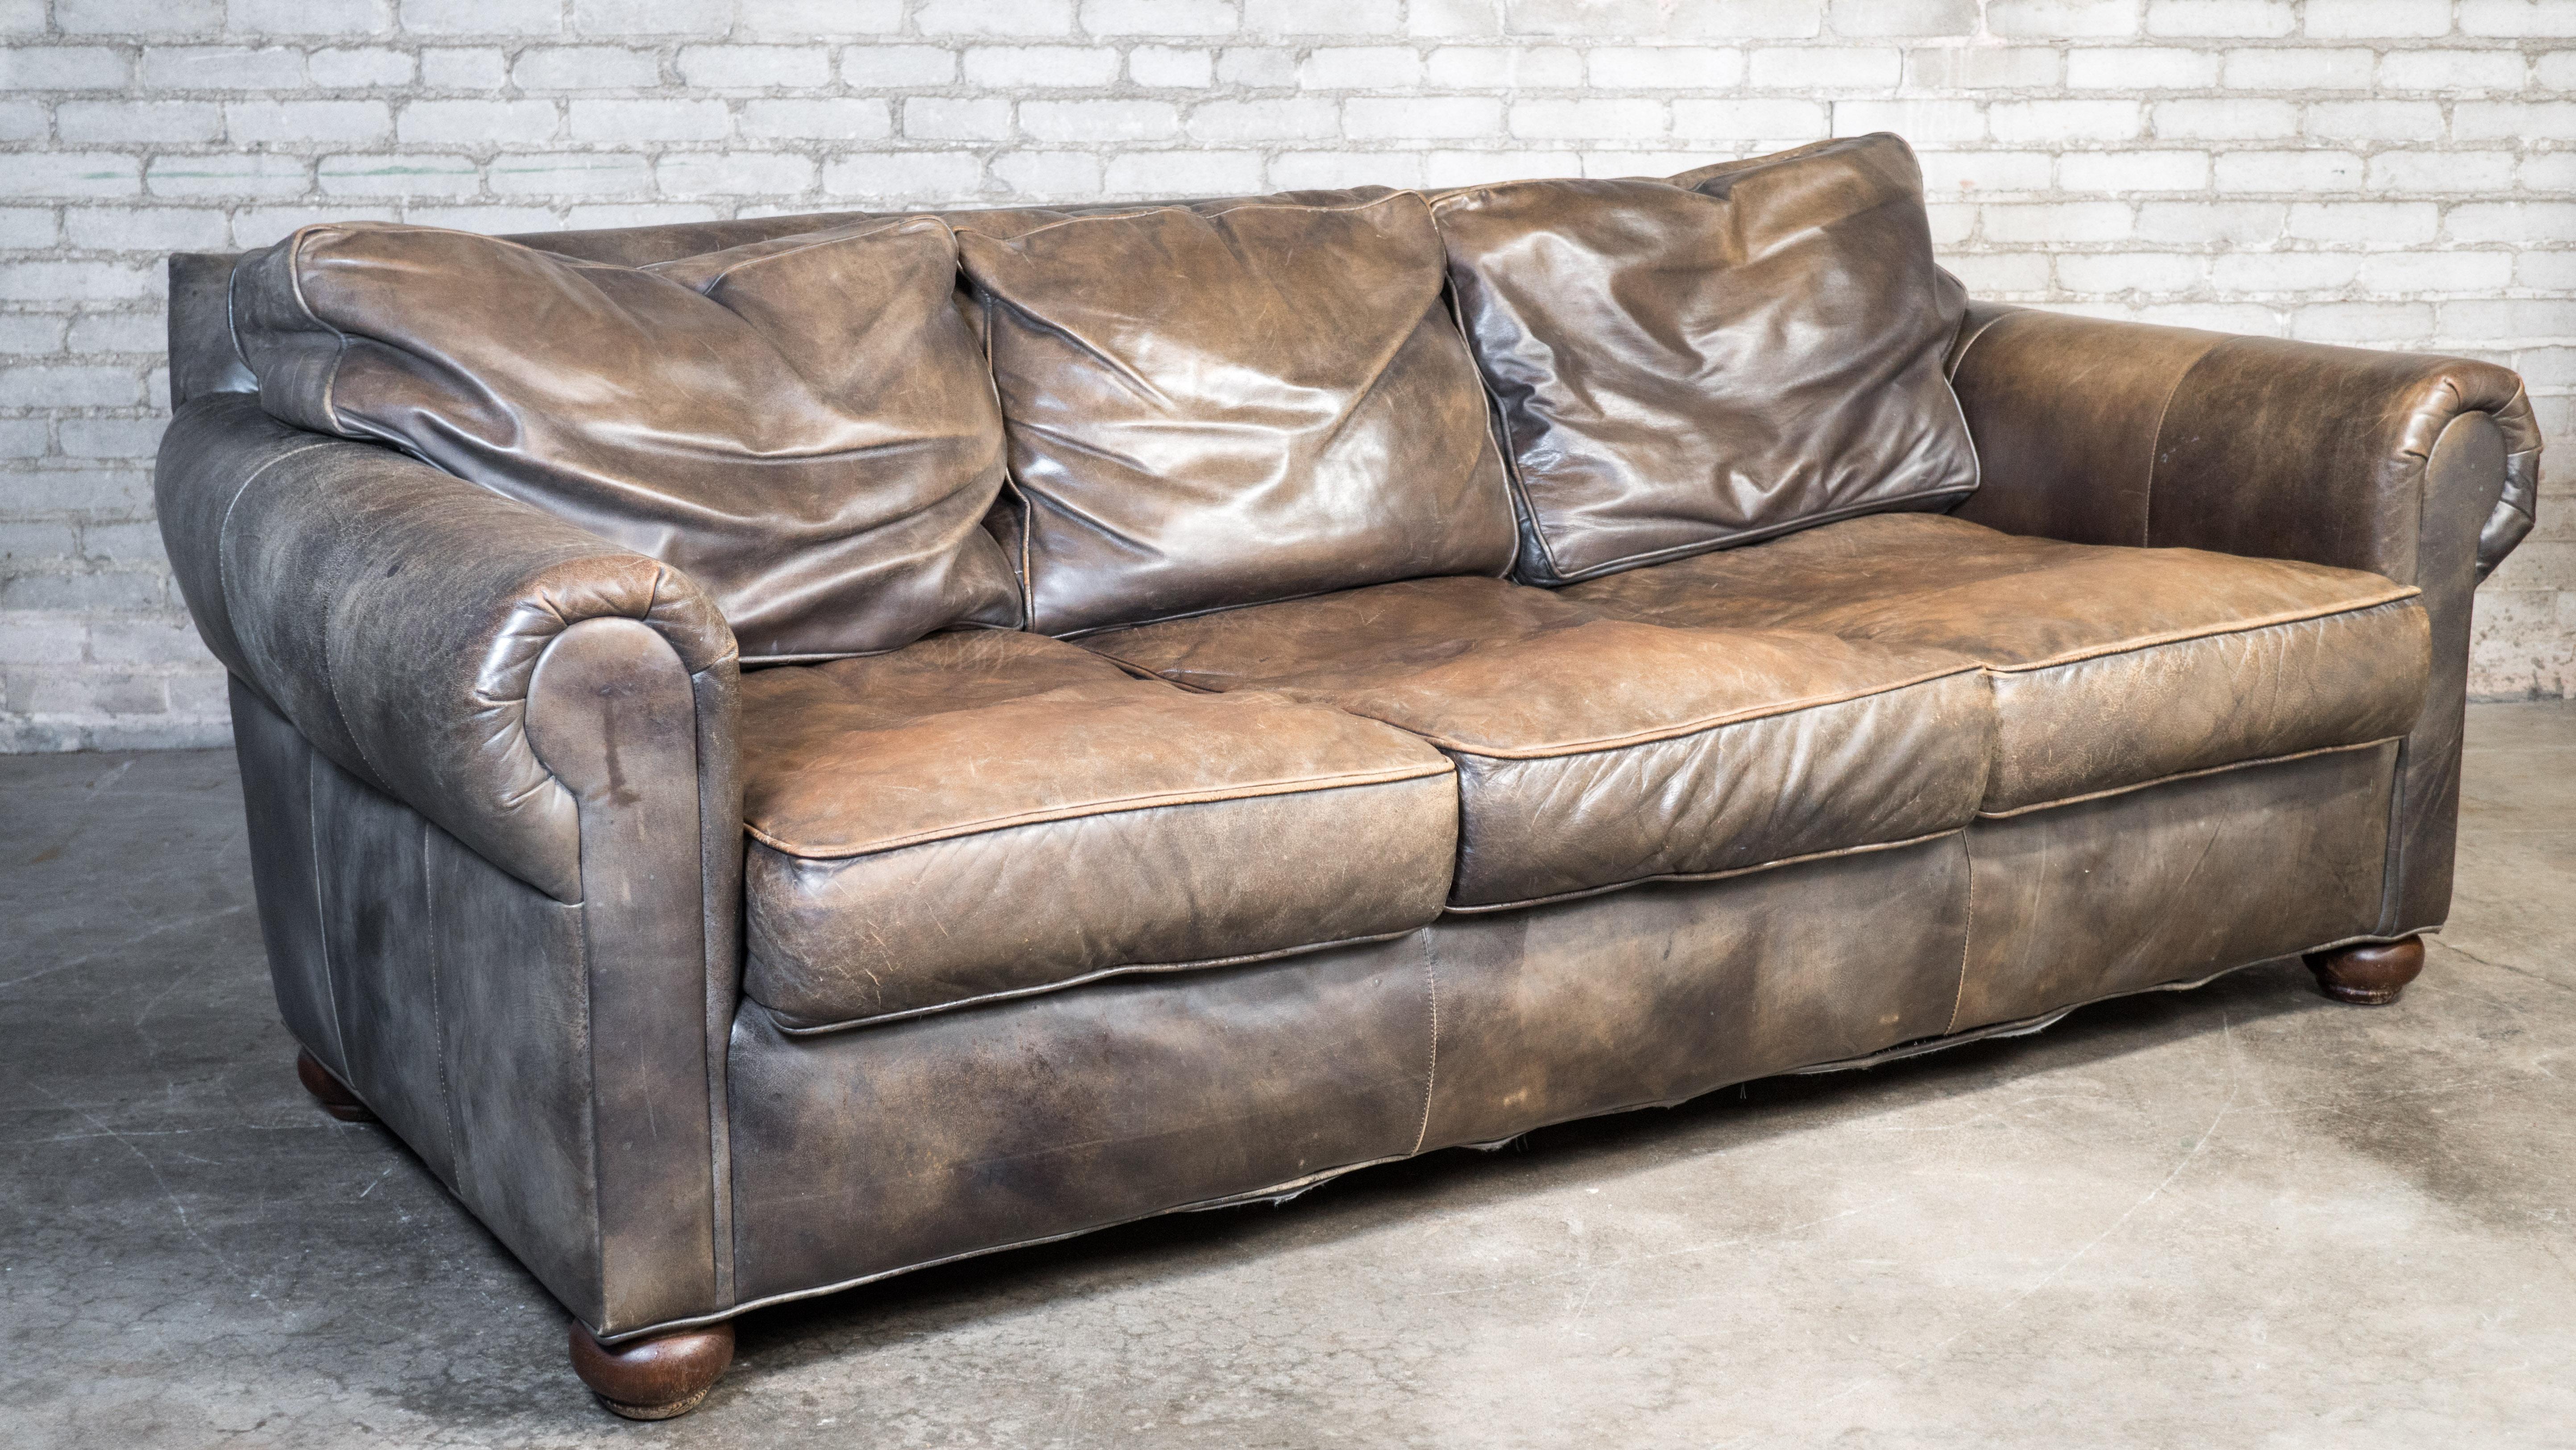 Restoration Hardware Three-Seater Lancaster Leather Sofa. Presented in distressed grayish brown leather. Premium down-feather filled cushions and soft, supple leather, contribute to immense comfort and a delightful lounging experience. Traditional